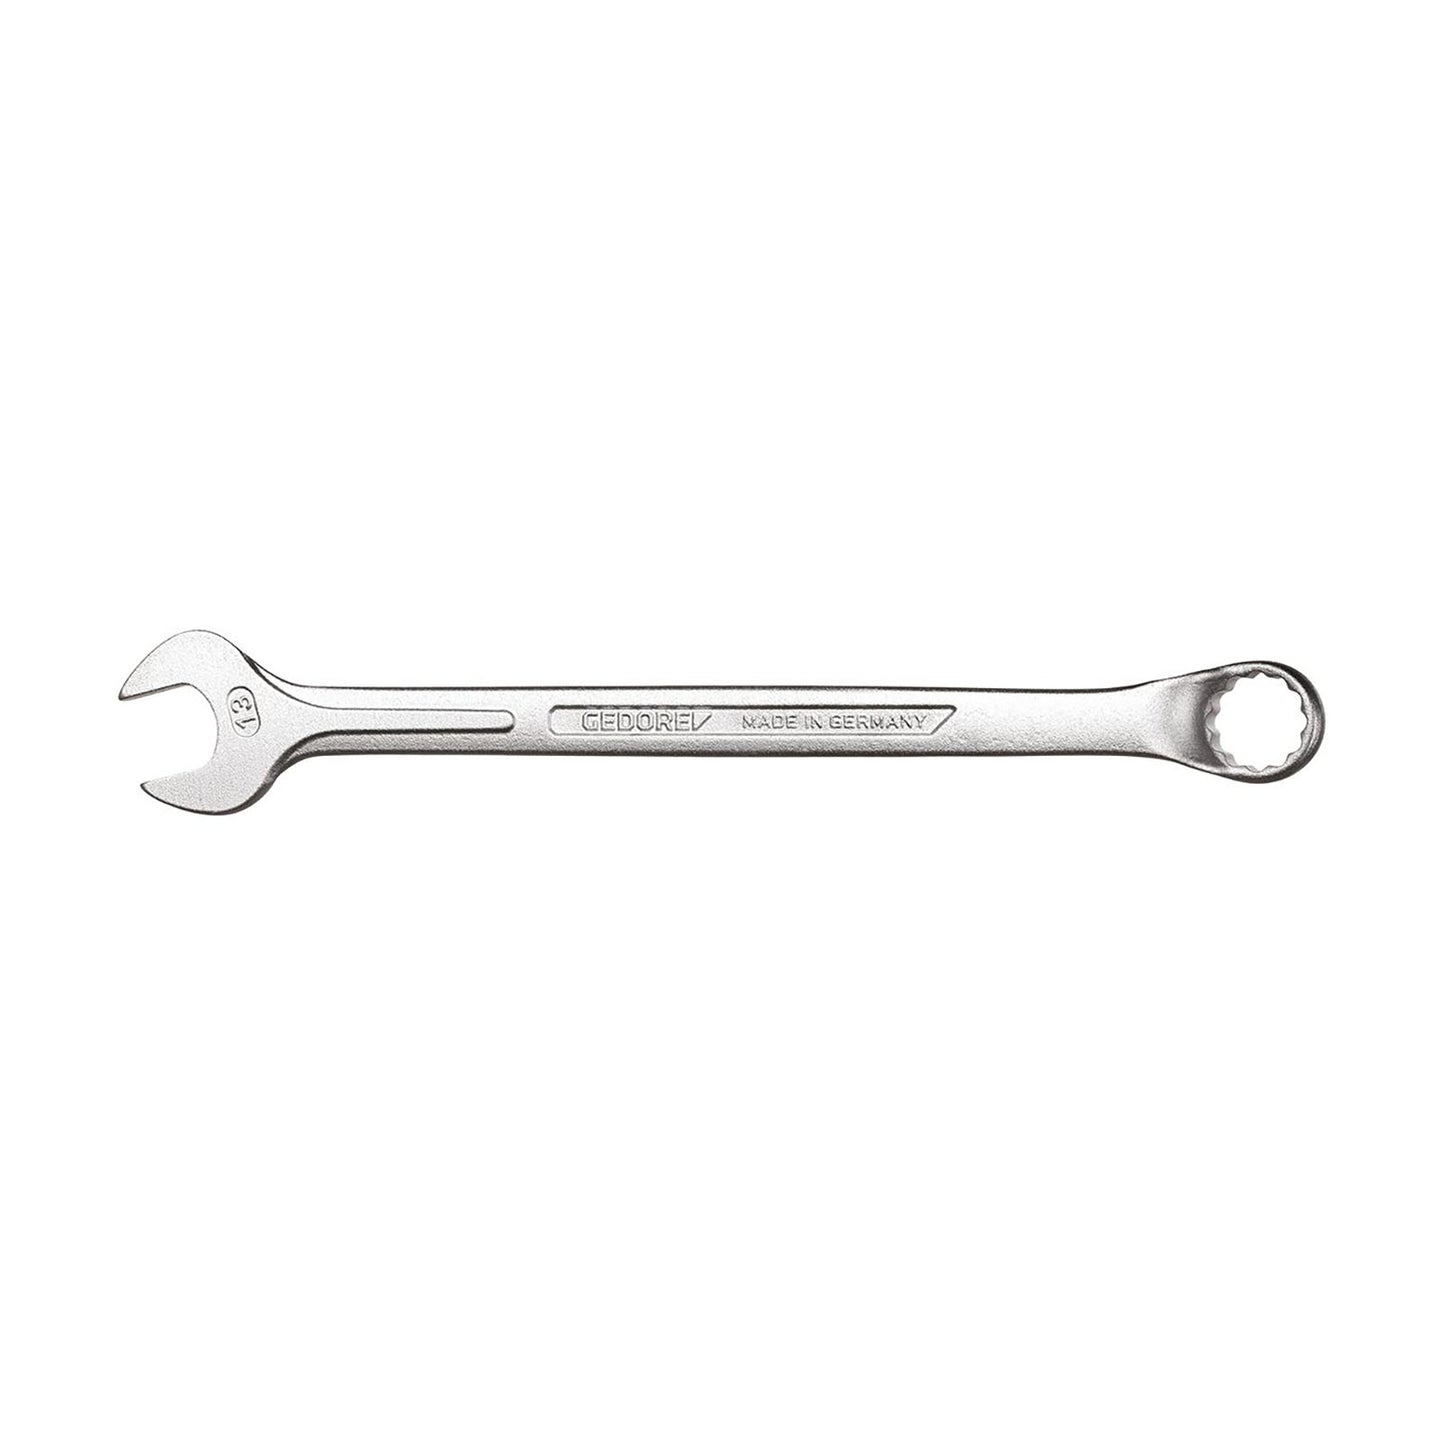 GEDORE 1 B 3/8W - Offset Combination Wrench, 3/8W (6009970)